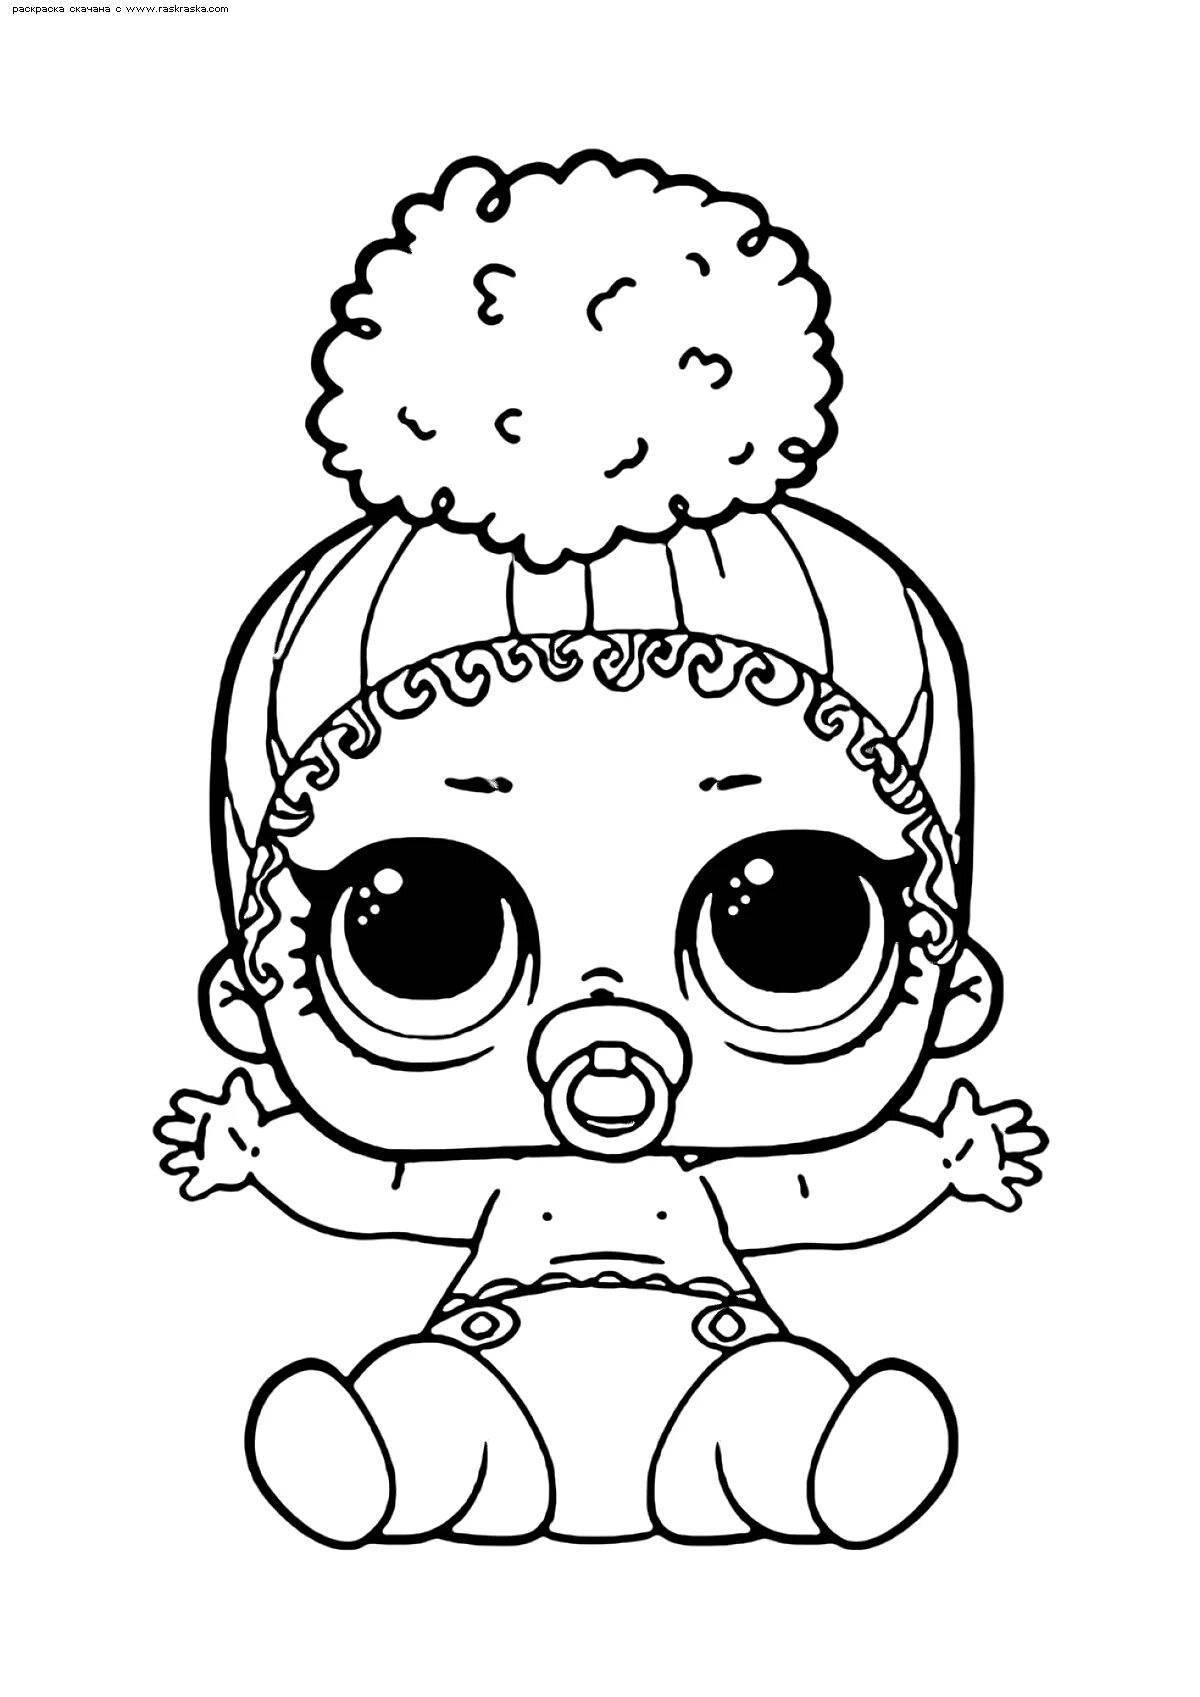 Colorful little lol doll coloring book